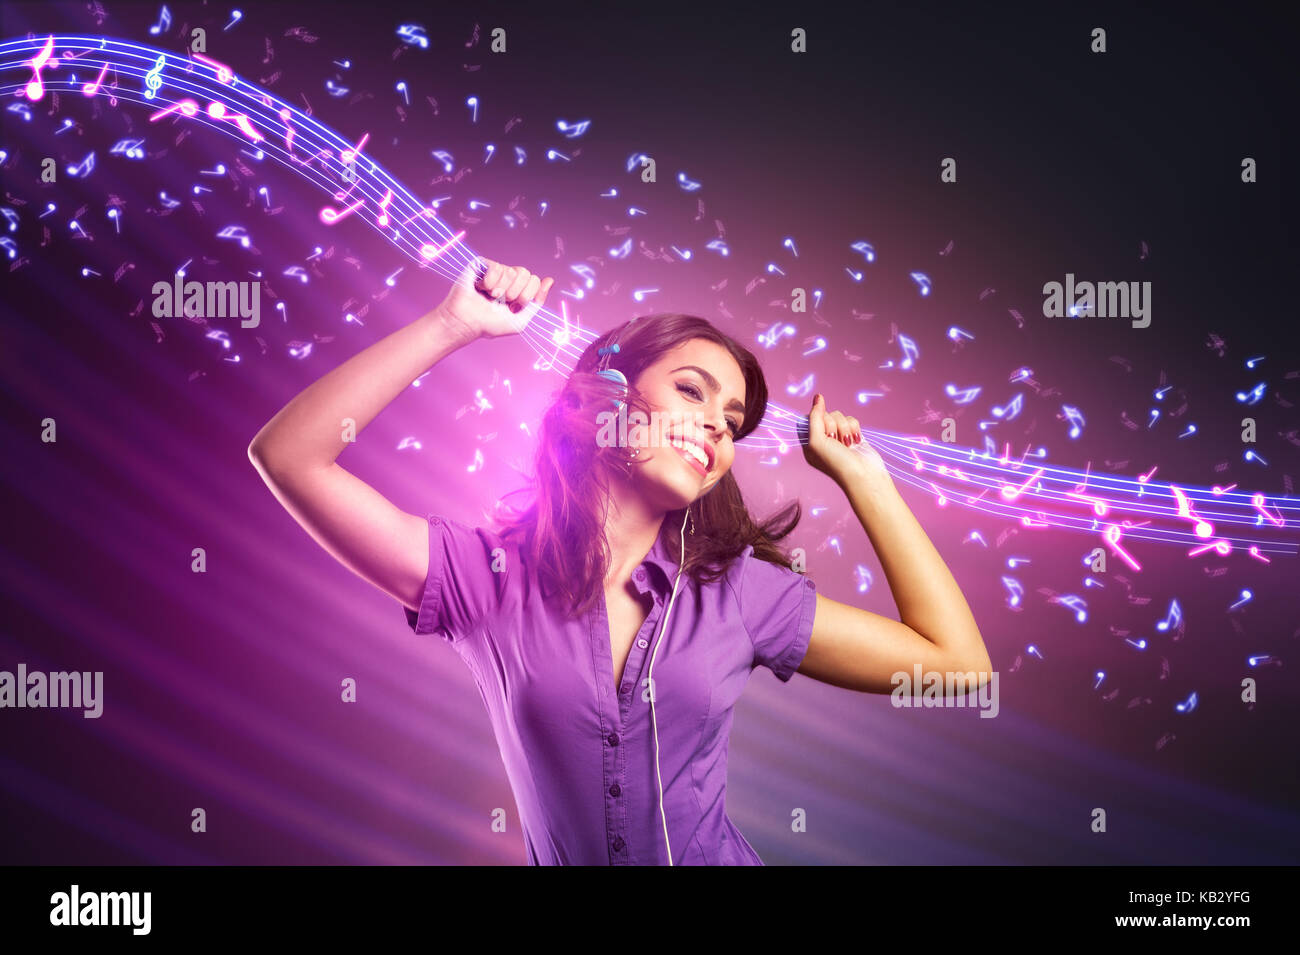 Happy young girl dancing with abstract sheet music system Stock Photo